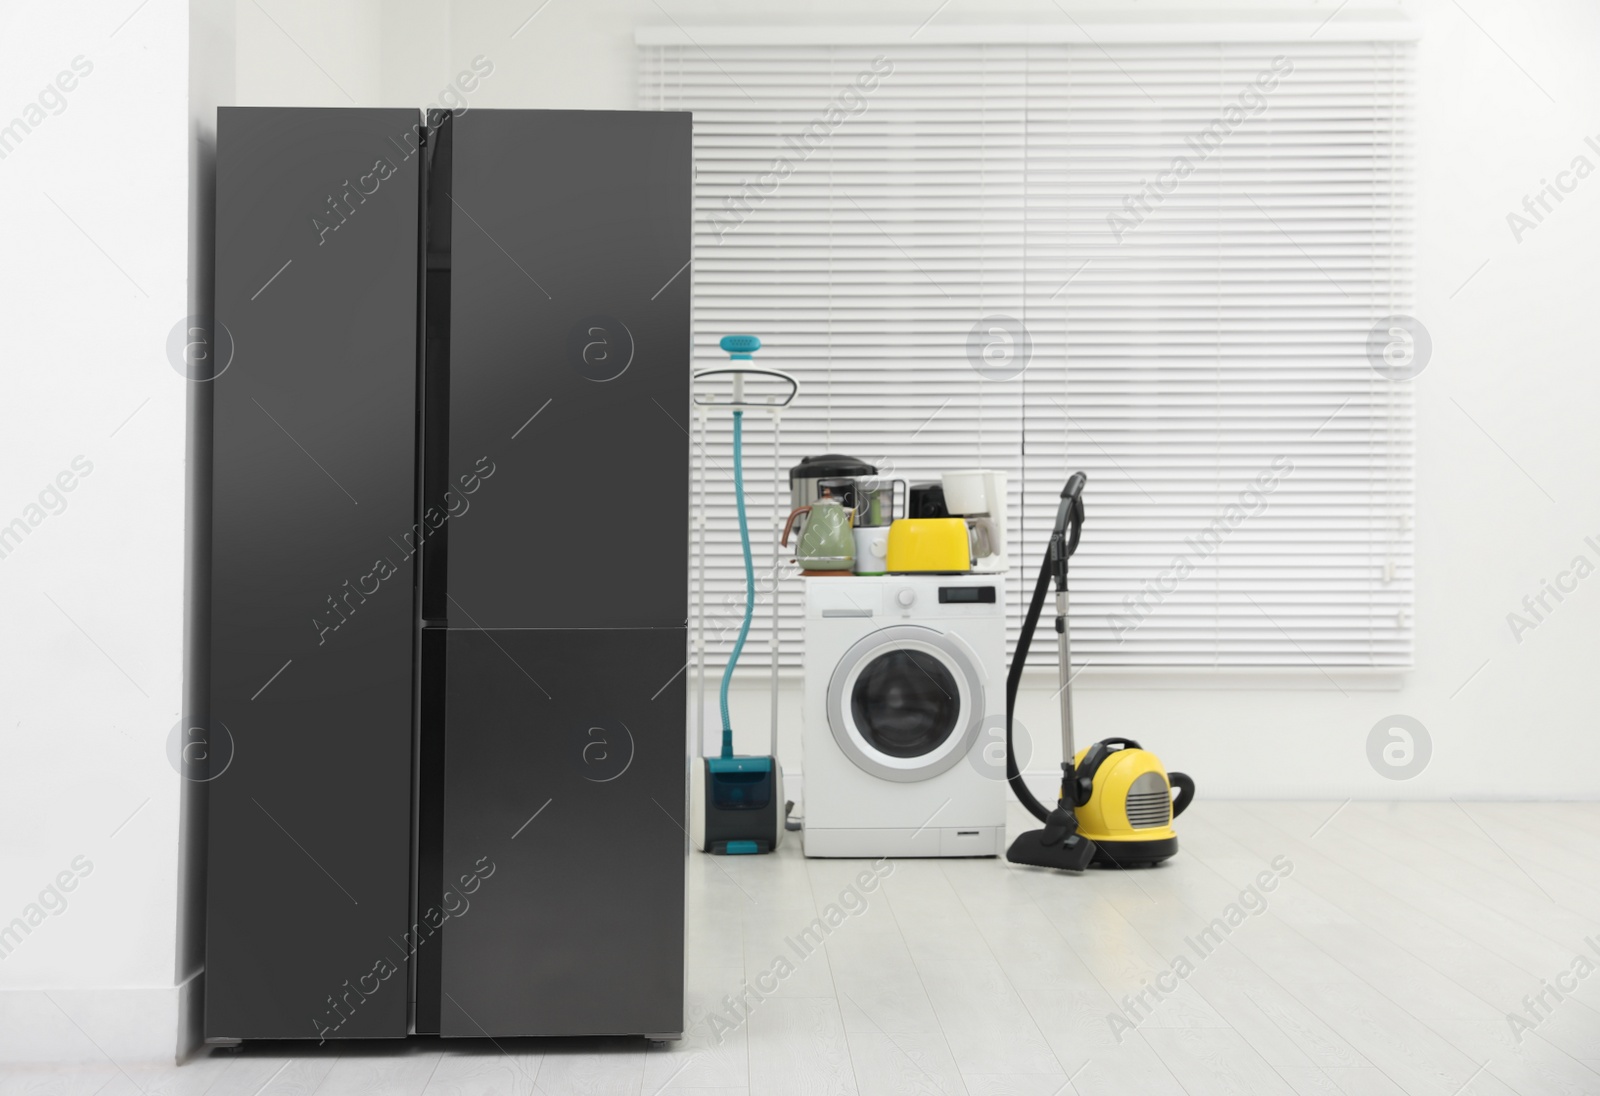 Photo of Refrigerator and different household appliances in room